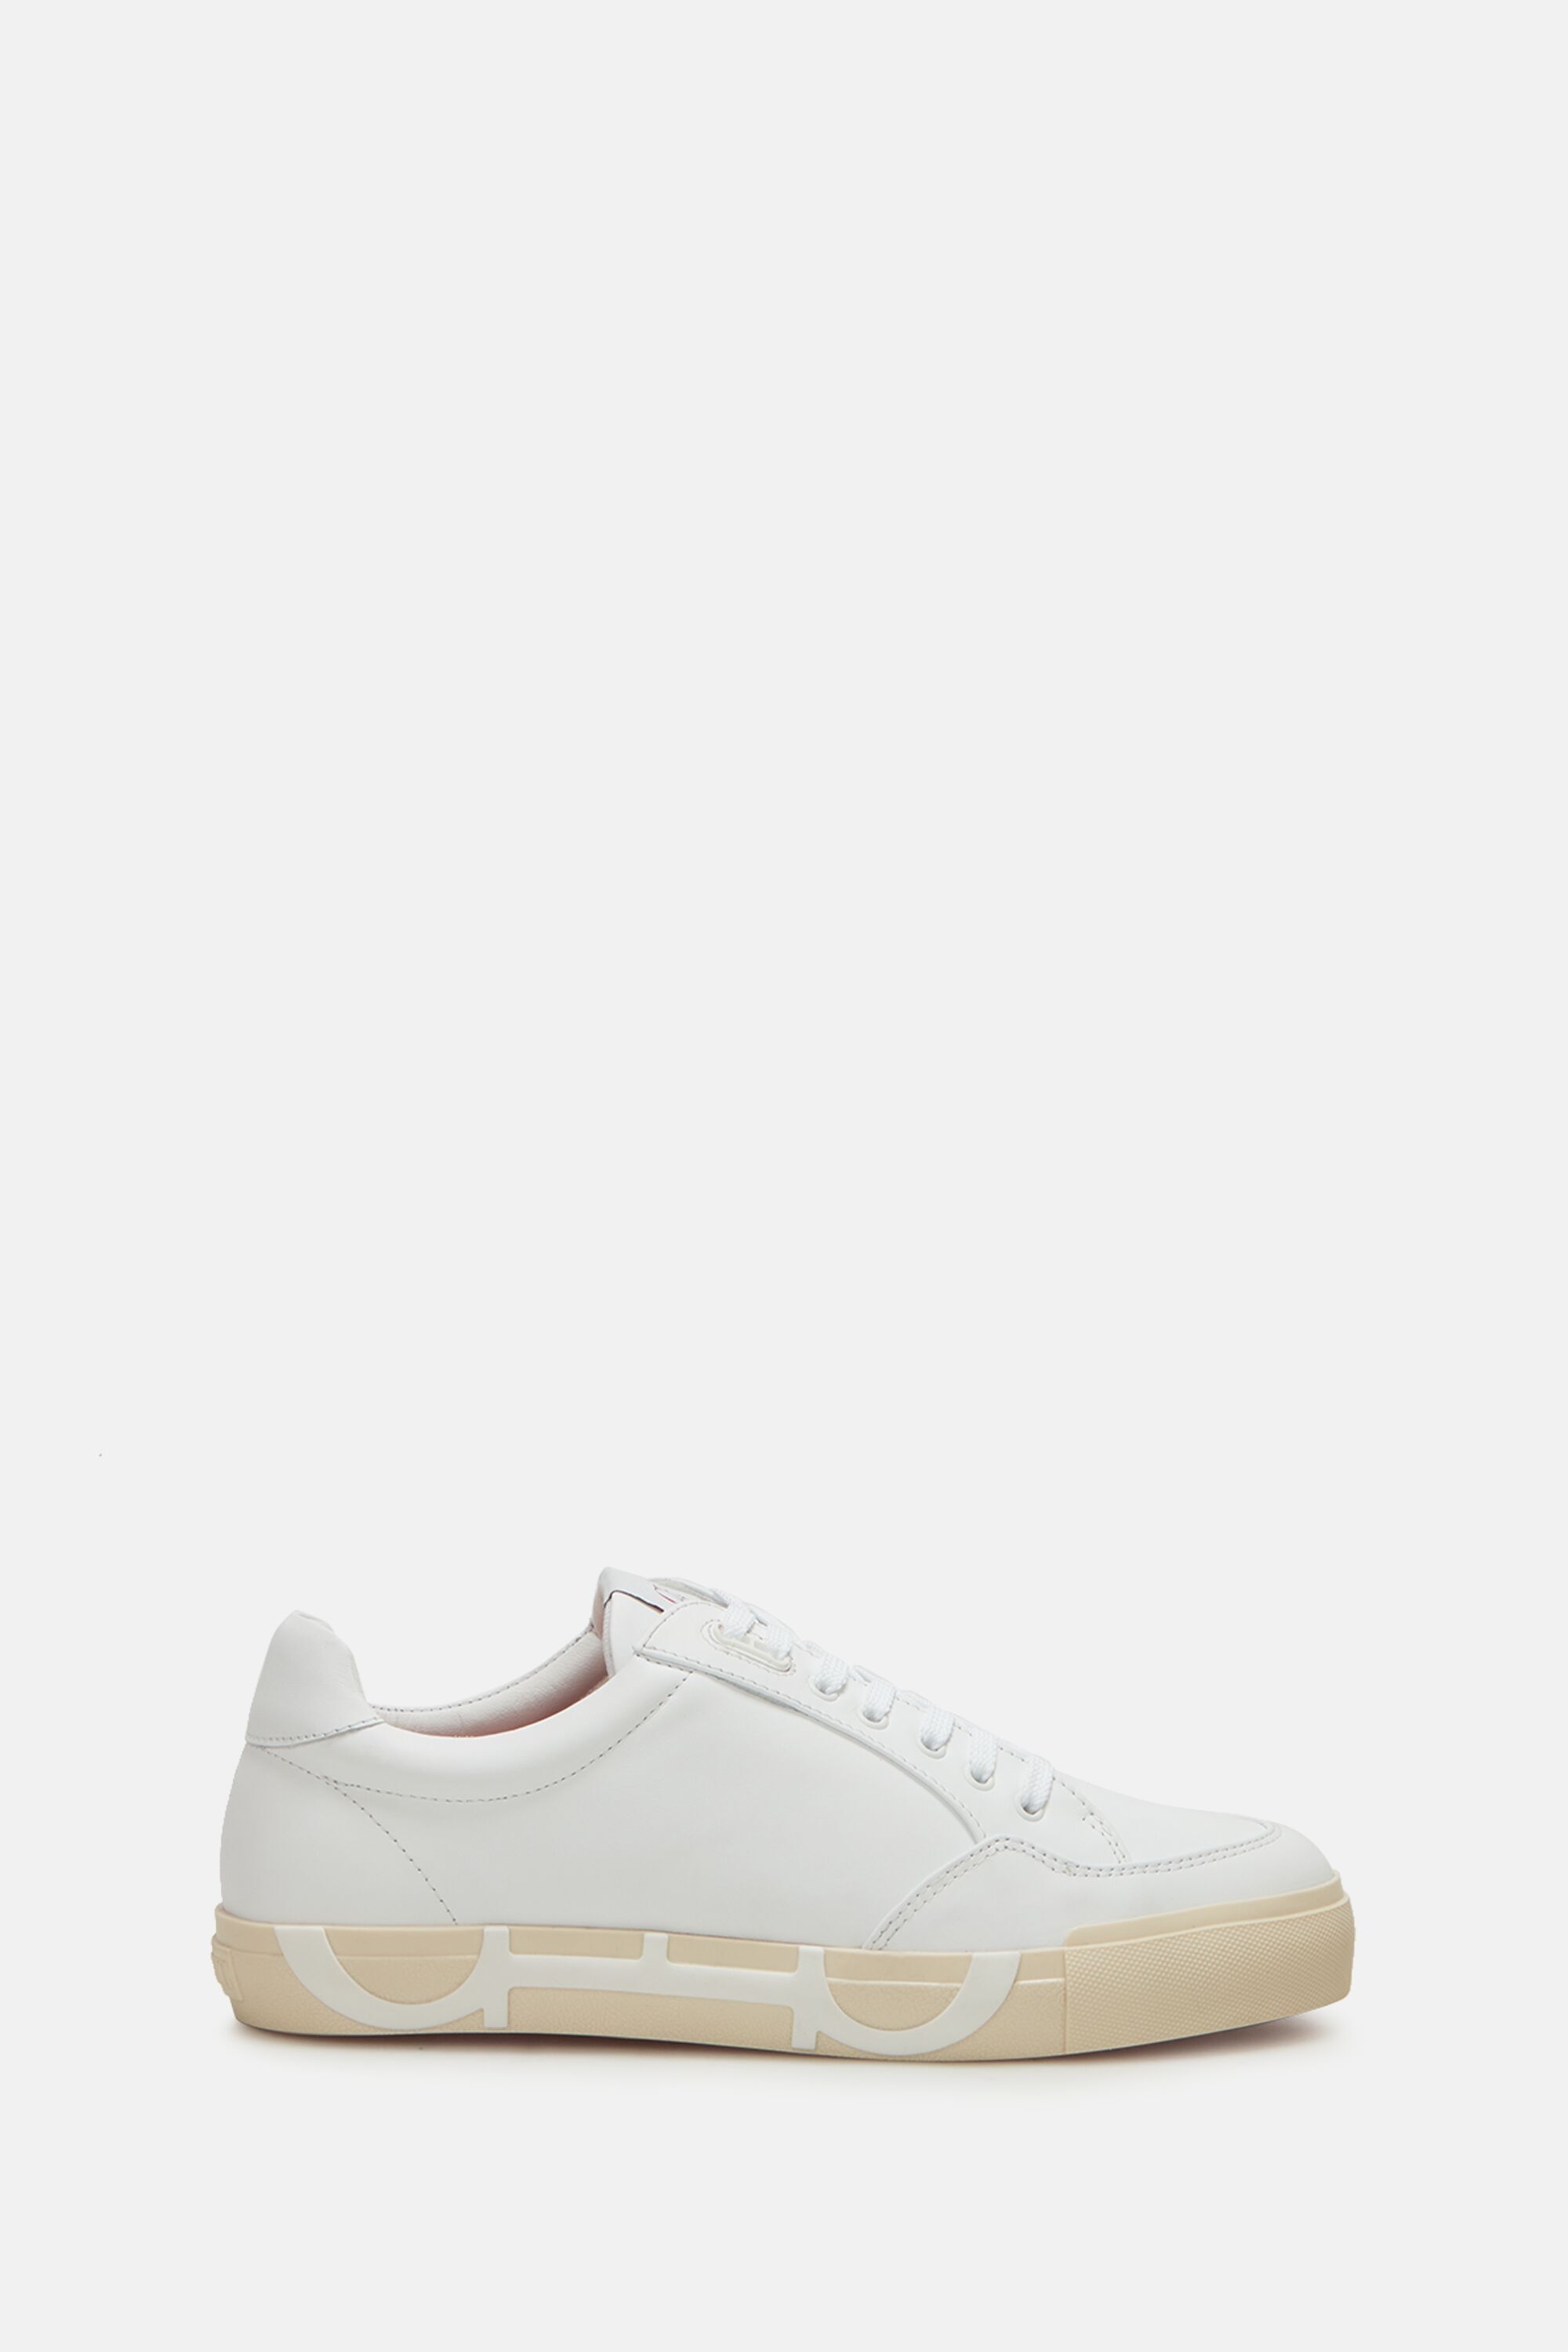 Doma Insignia leather bamba sneakers